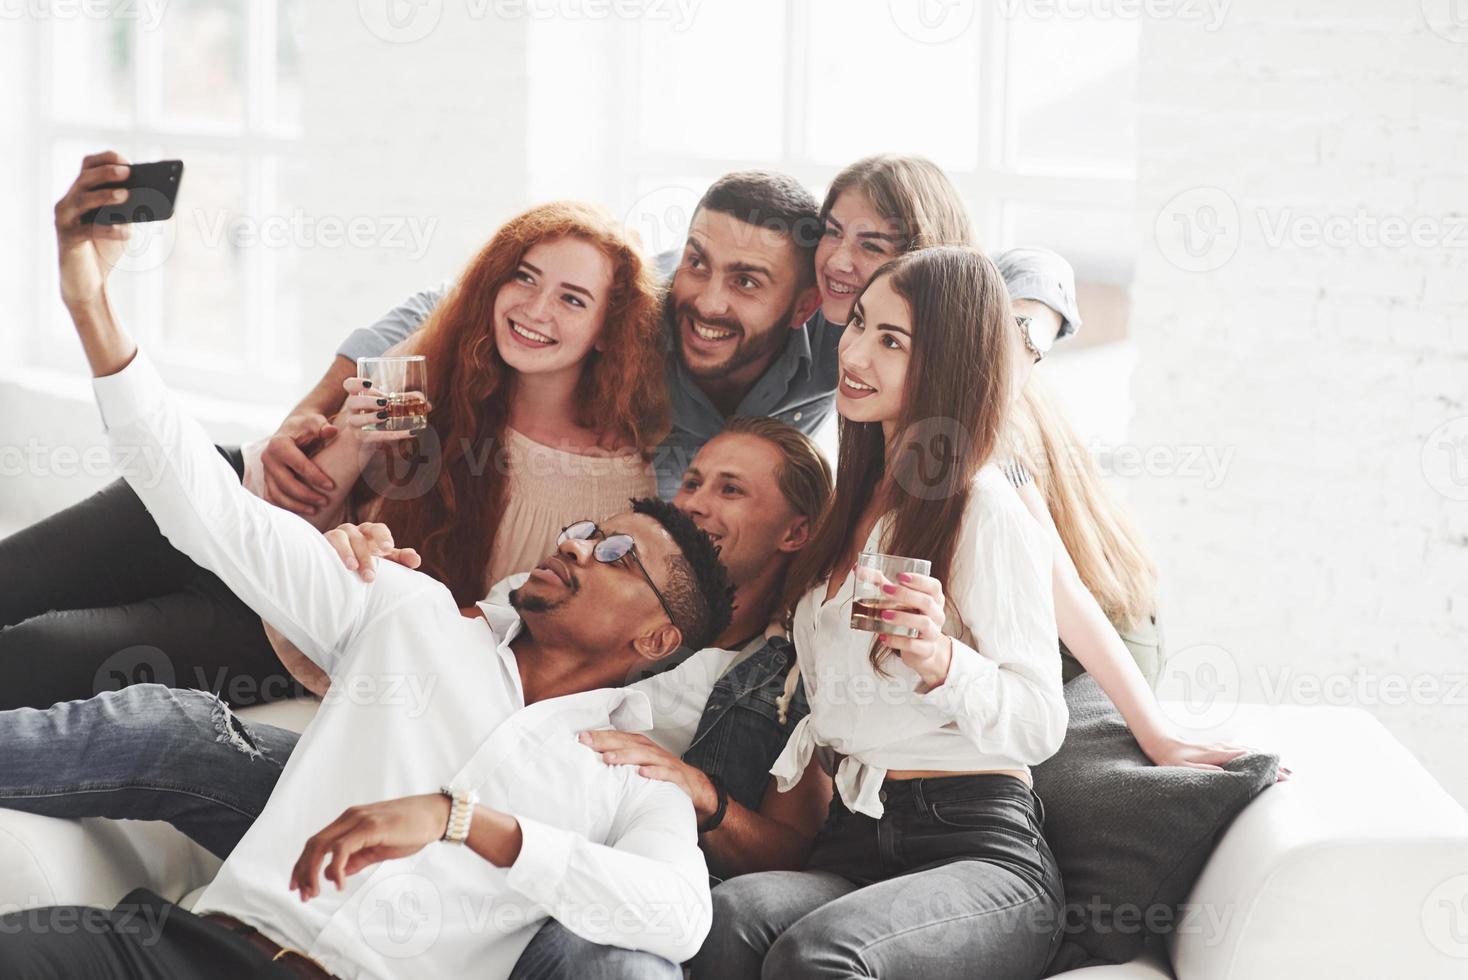 A little alcohol will not be superfluous. Group of multiracial teammates having good time on their break and taking some photos